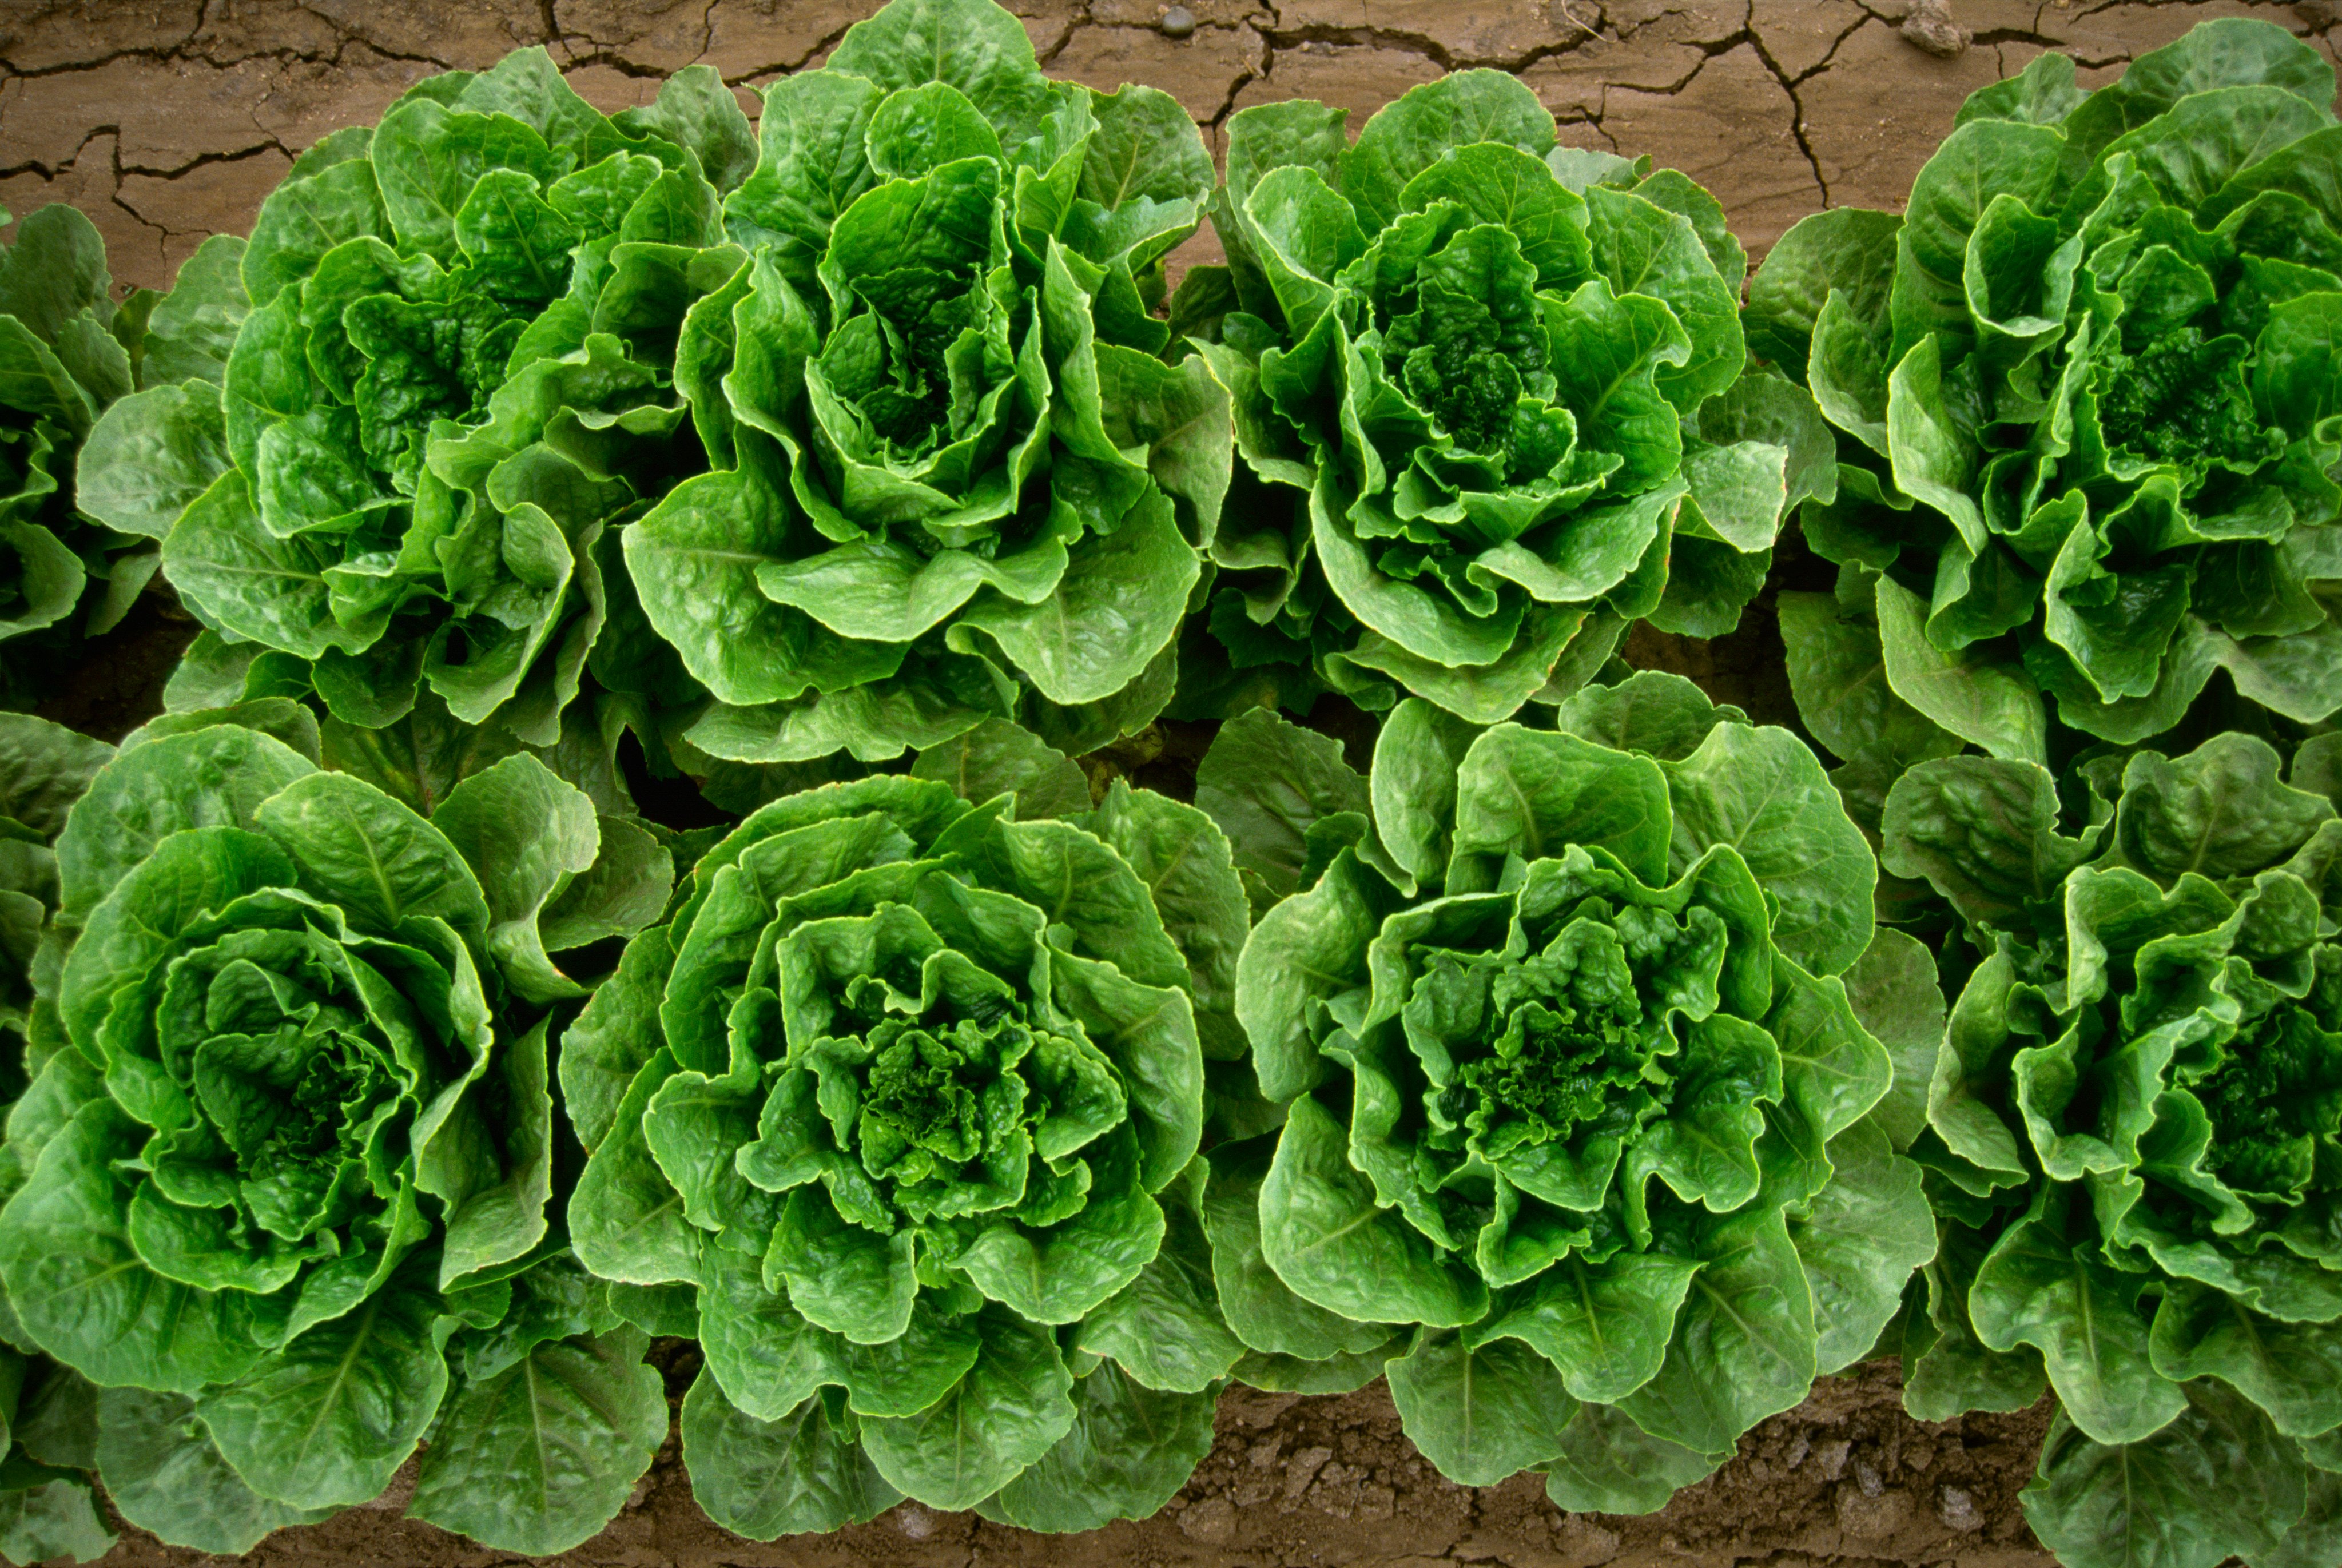 The origins of all varieties of lettuce can be traced to a weedy form first used in ancient Egypt, the pressed seeds of which were a source of cooking oil. Photo: Getty Images